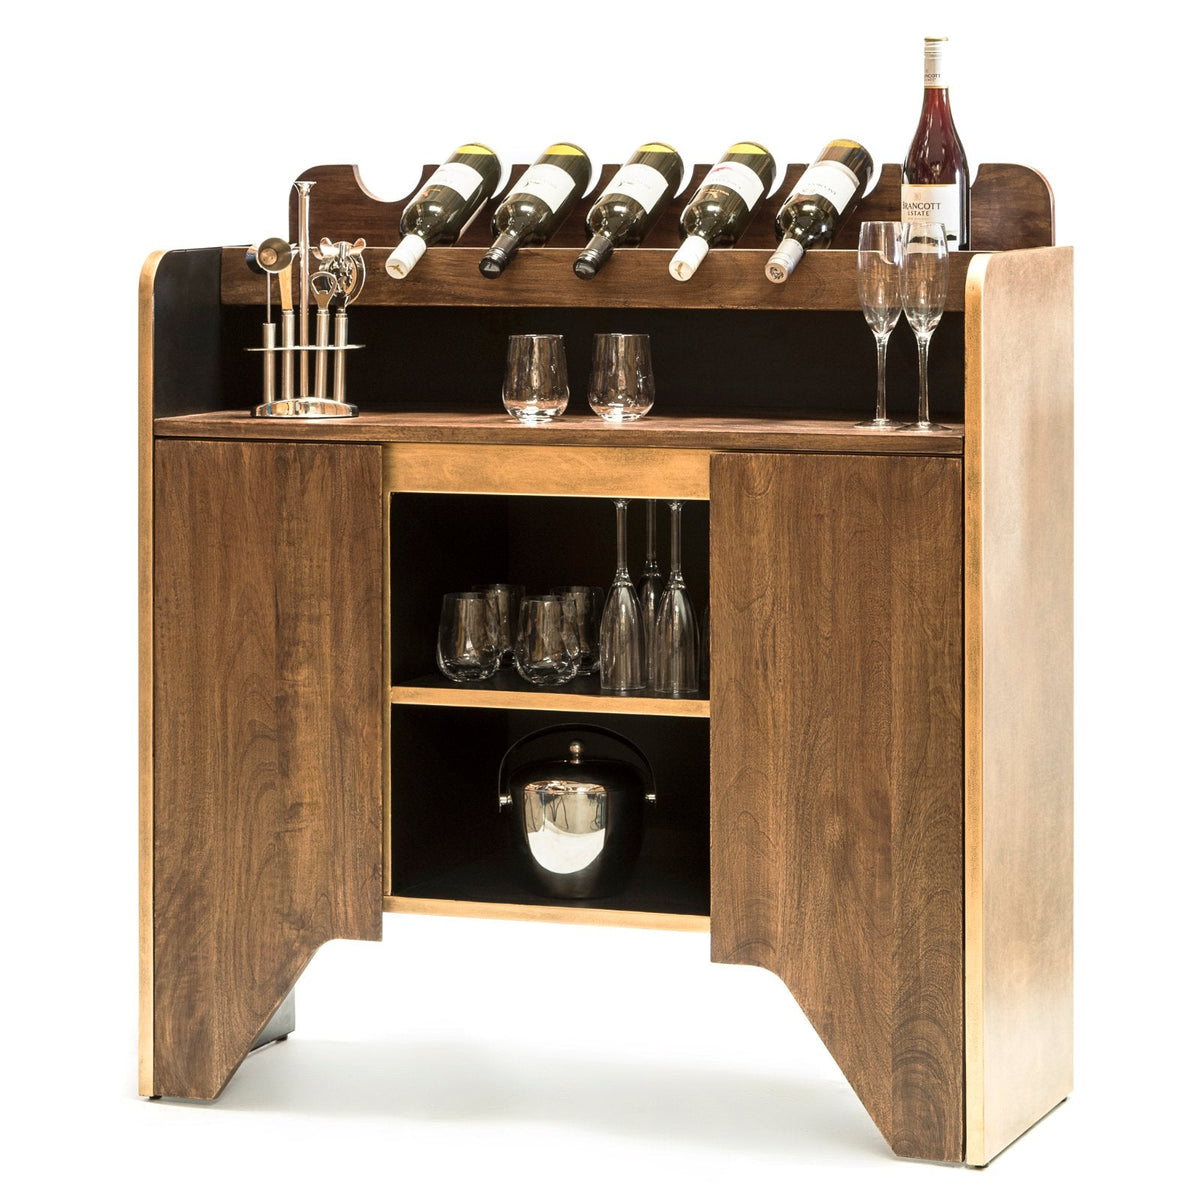 Milano Wine Cabinet with Bottle Holders